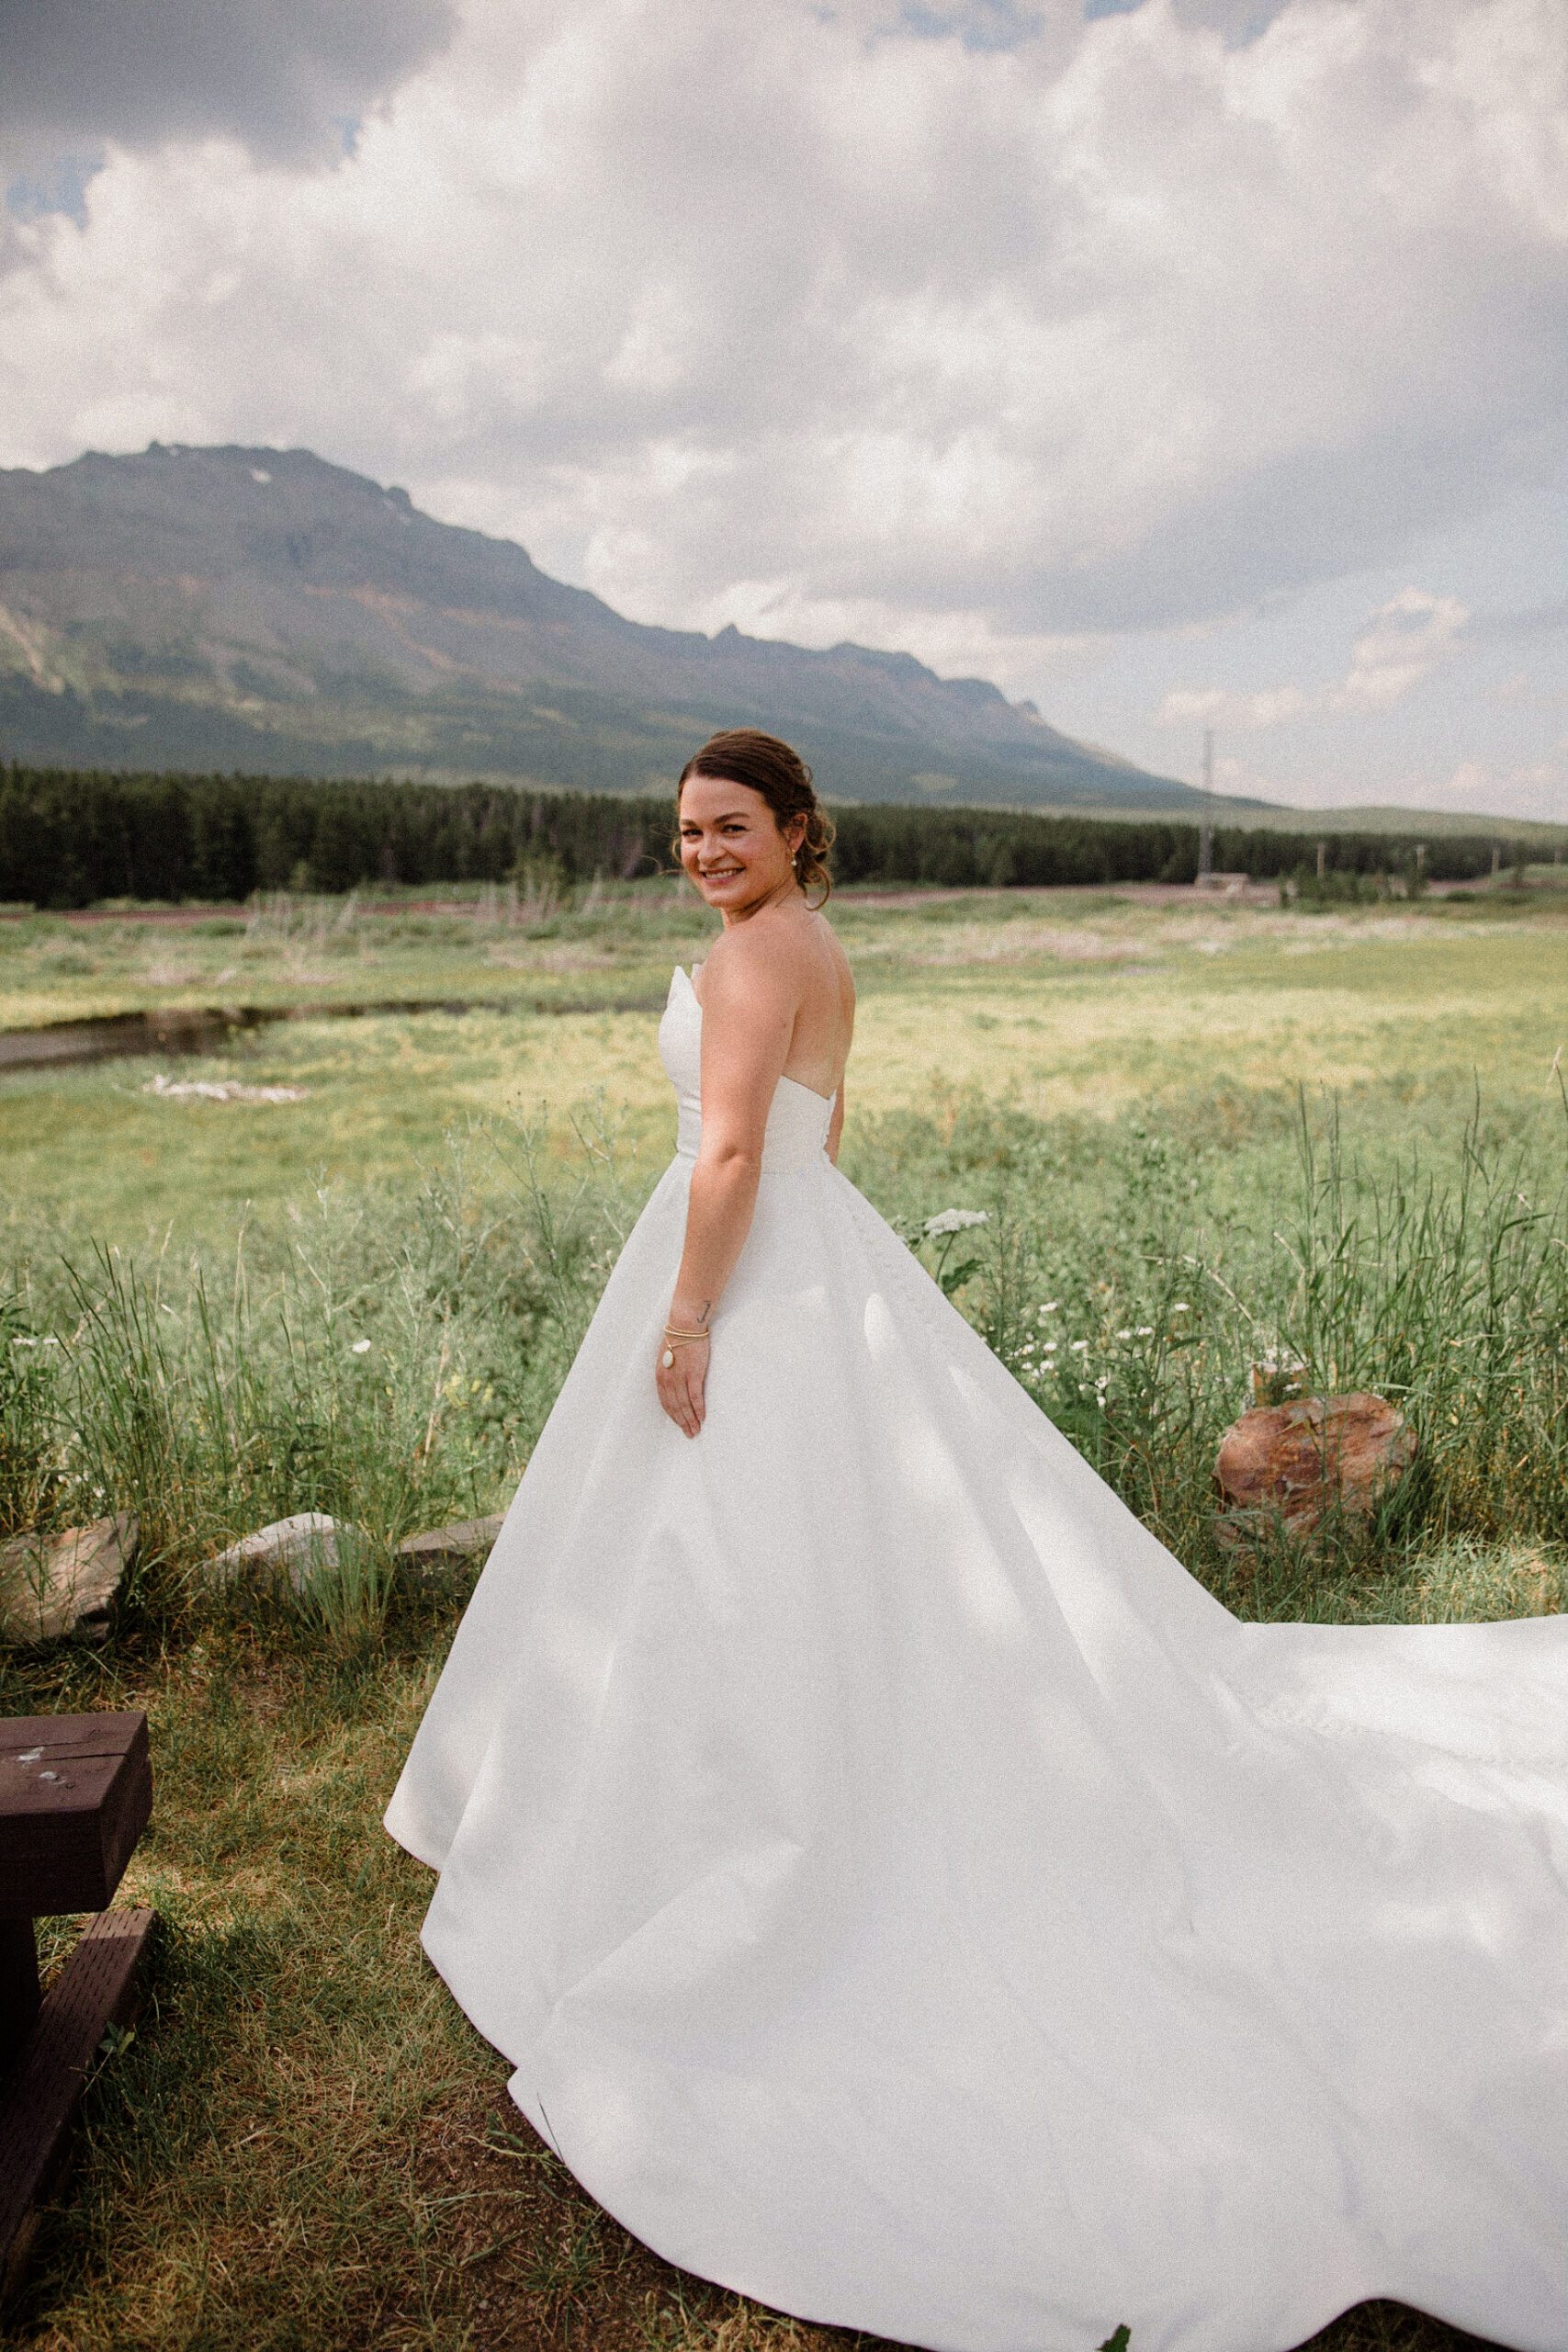 Summit Mountain Lodge wedding is located right outside Glacier National Park. The best Glacier National Park wedding venue is Summit Mountain Lodge. 